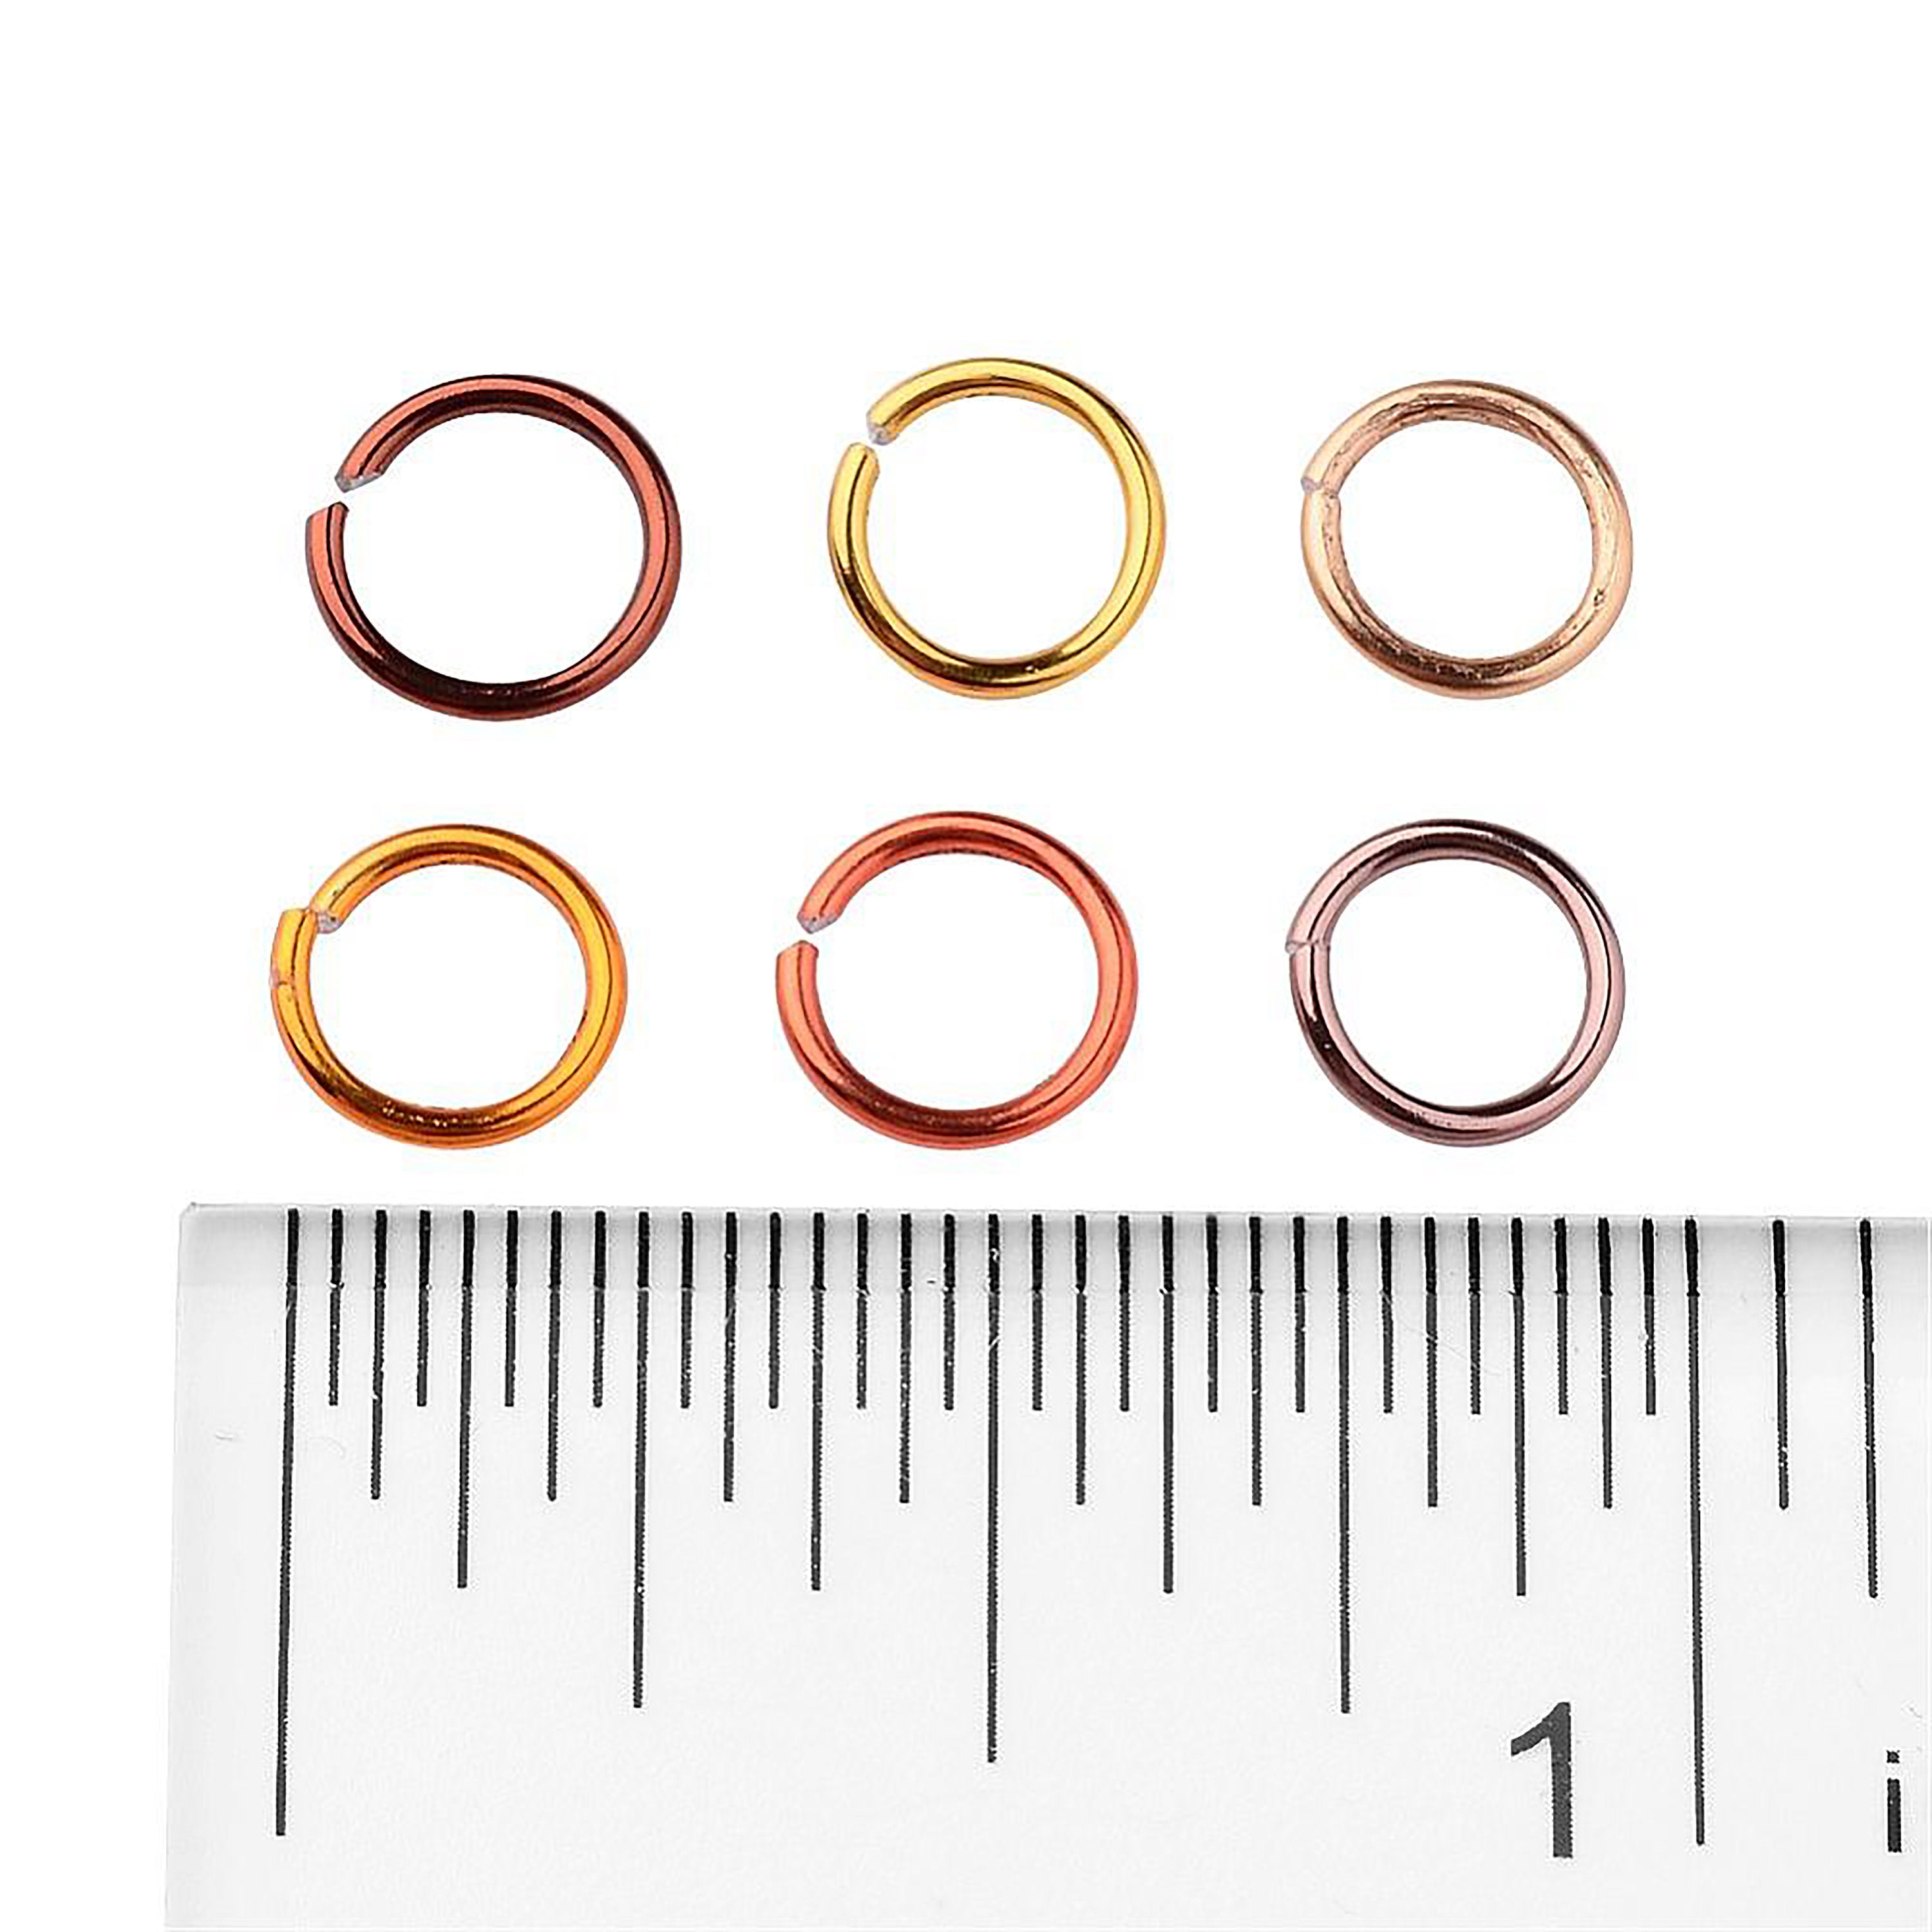 1 box (1,080 pcs), 6x0.8mm, 6 Colors Aluminum Wire Open Jump Rings  in Gold & Copper Shades Mixed Color